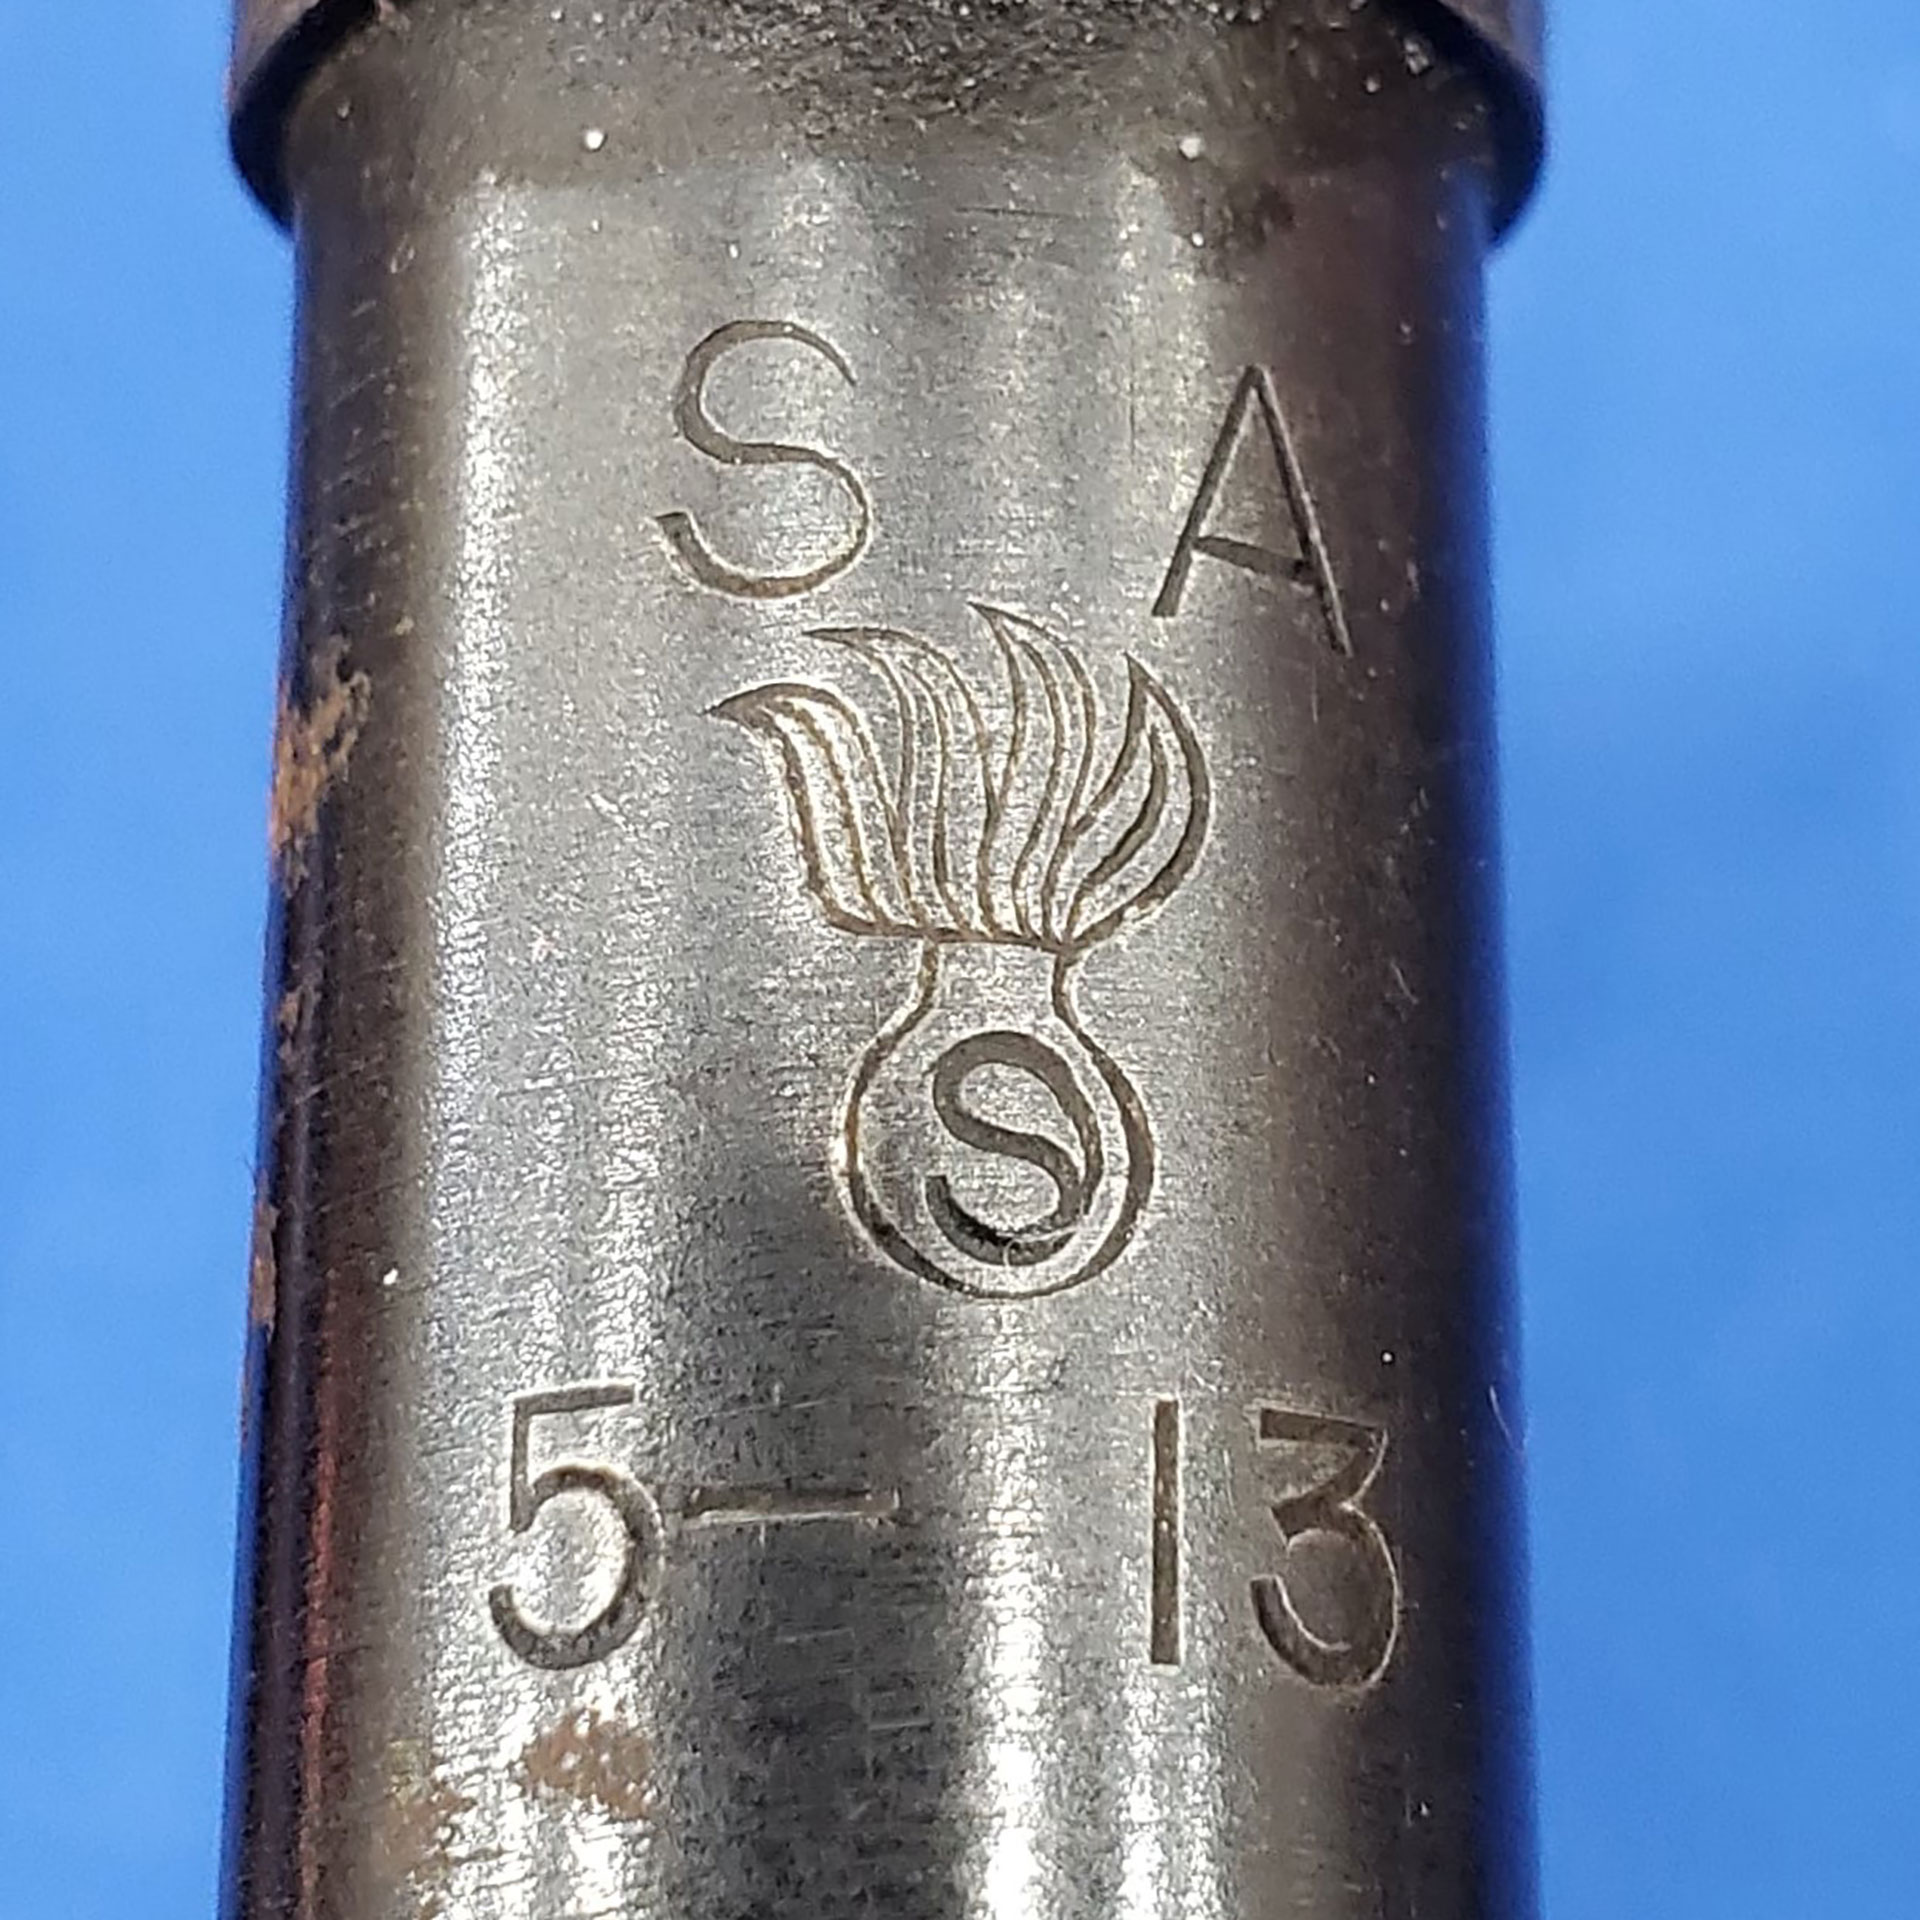 A Springfield Armory-made Model of 1903 rifle barrel bearing the same “S” within an ordnance escutcheon on the alleged “Savage Slide” Photo credit Steve Norton.